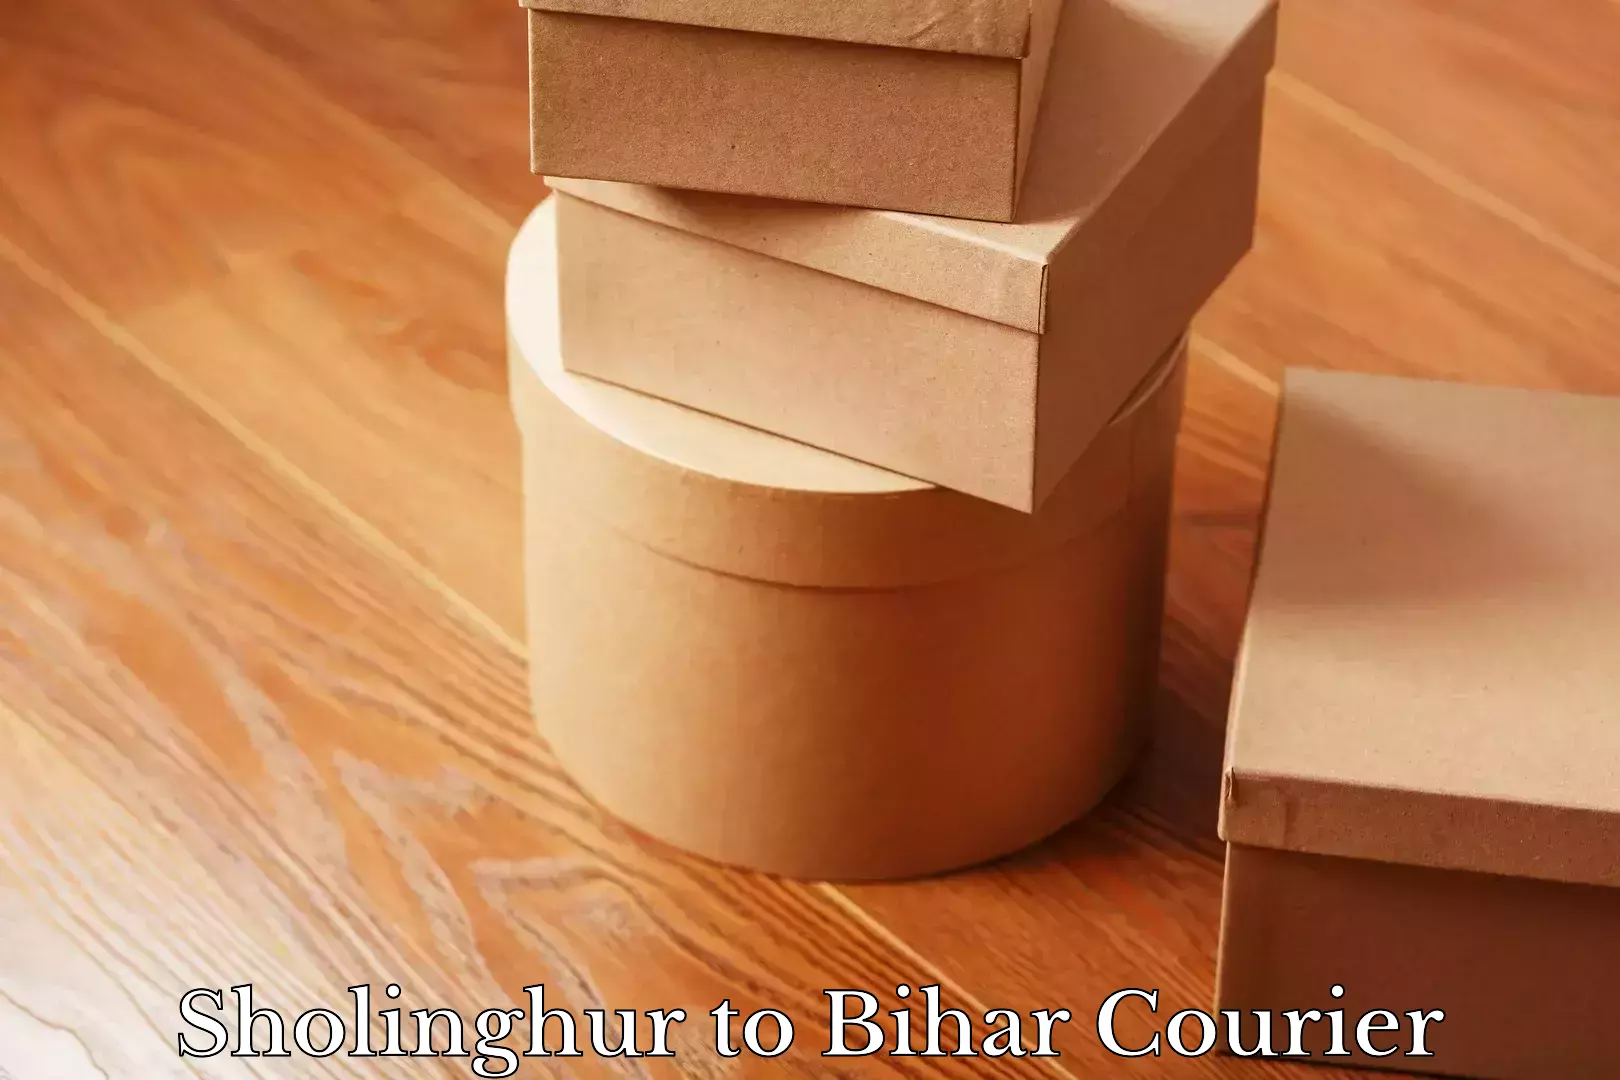 Domestic courier in Sholinghur to Bihar